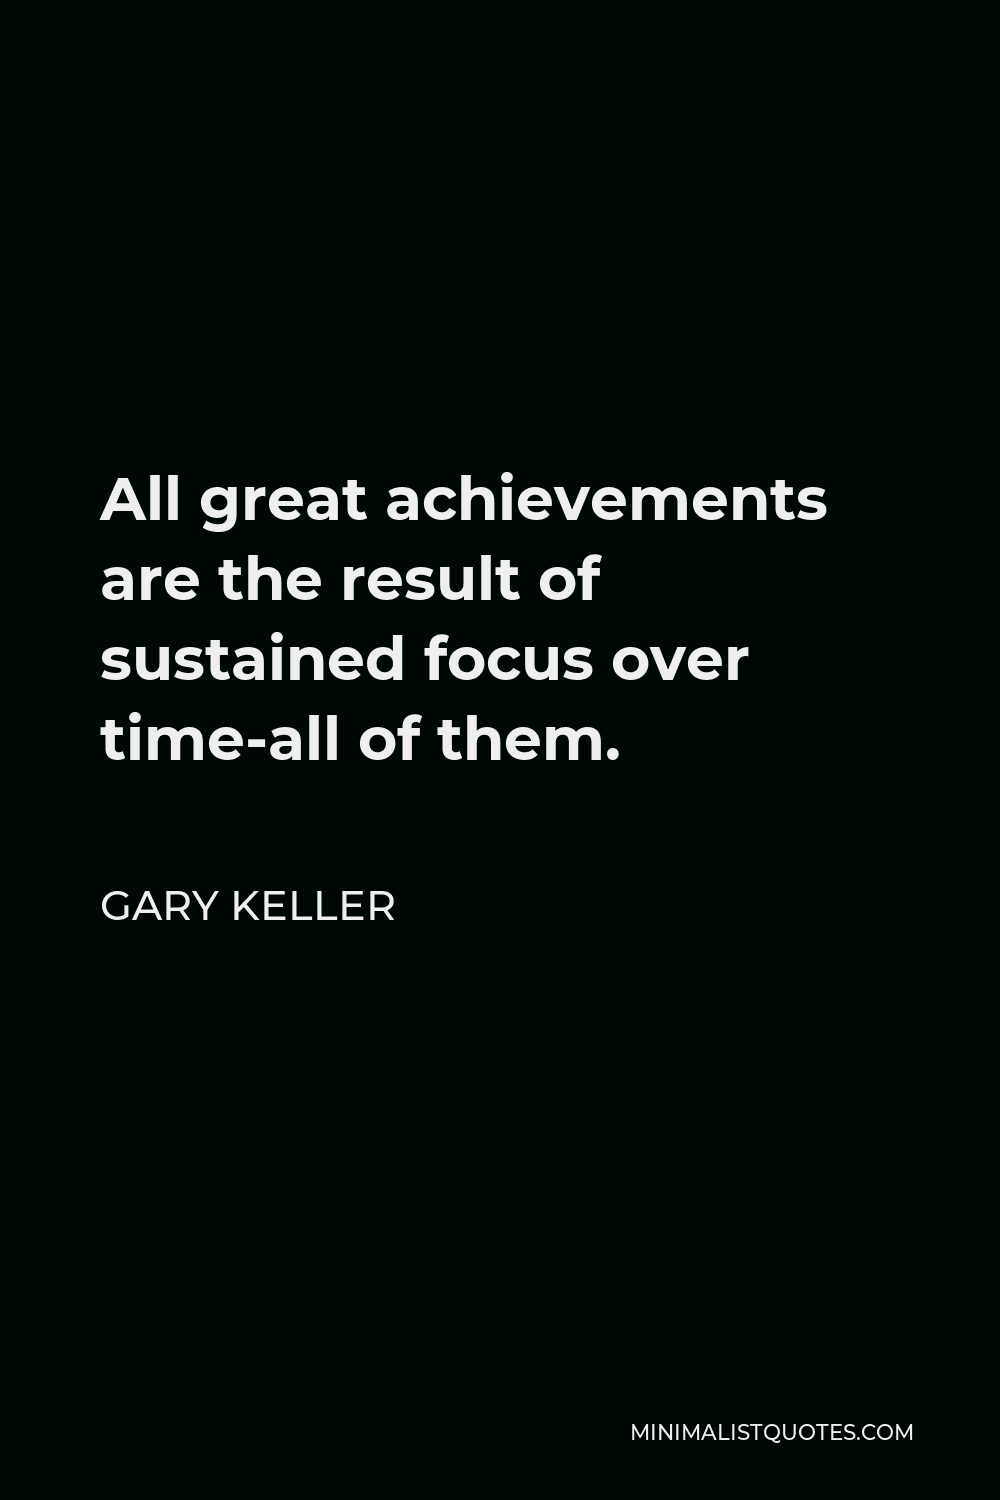 Gary Keller Quote - All great achievements are the result of sustained focus over time-all of them.